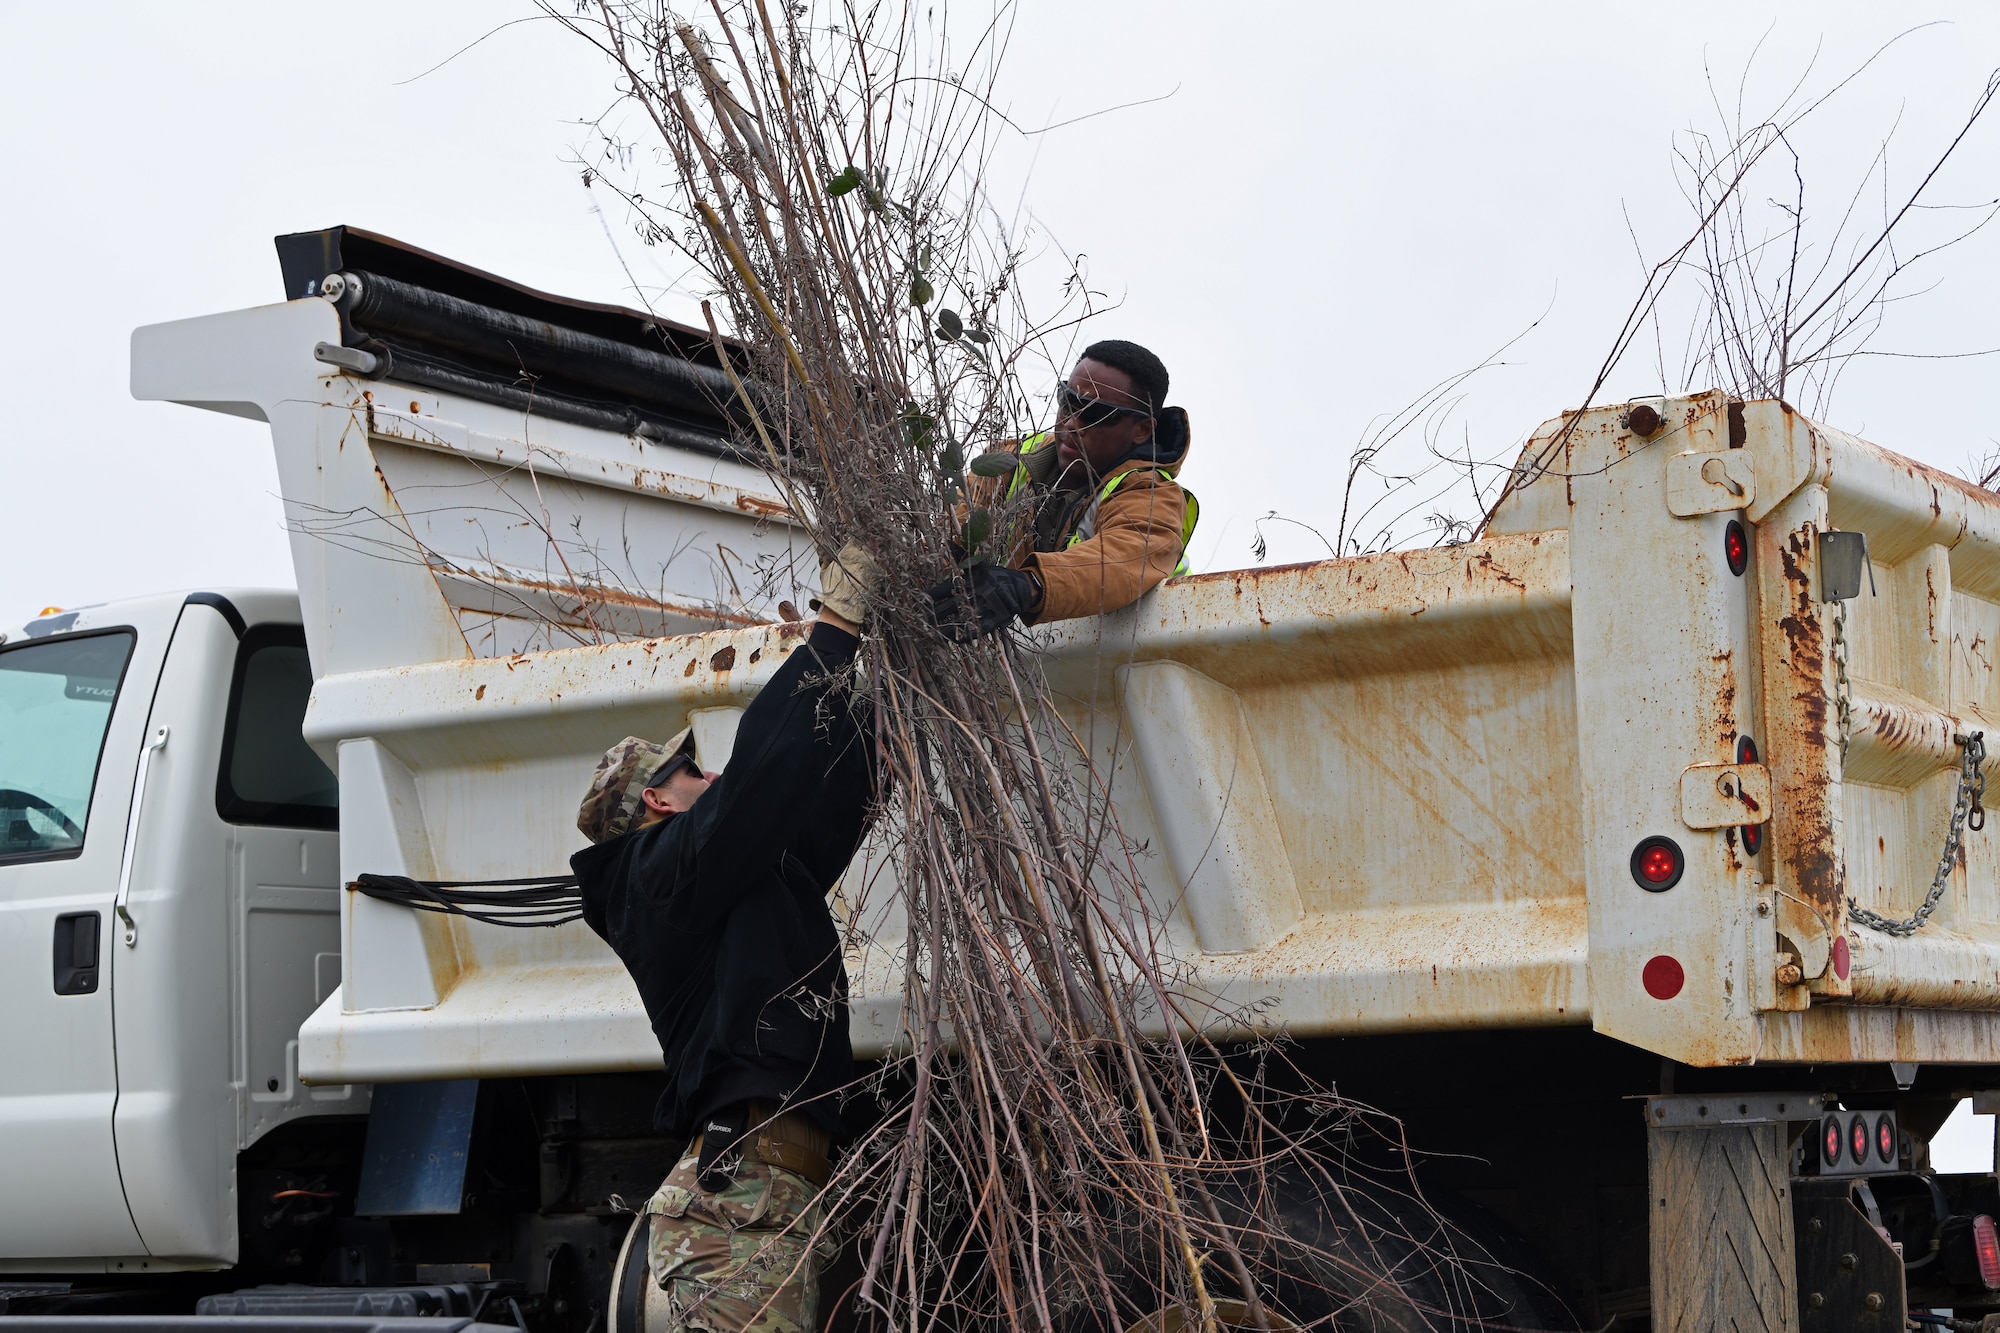 Staff Sgt. Daniel Eaton, left, and Senior Airman Diante Townsend, 9th Civil Engineering Squadron pavement and construction equipment specialists, loads a dump truck with young trees that were growing in a ditch, Jan. 8, 2020, at Beale Air Force Base, California. The trees were cut down as a flood prevention effort. (U.S. Air Force photo by Airman 1st Class Luis A. Ruiz-Vazquez)